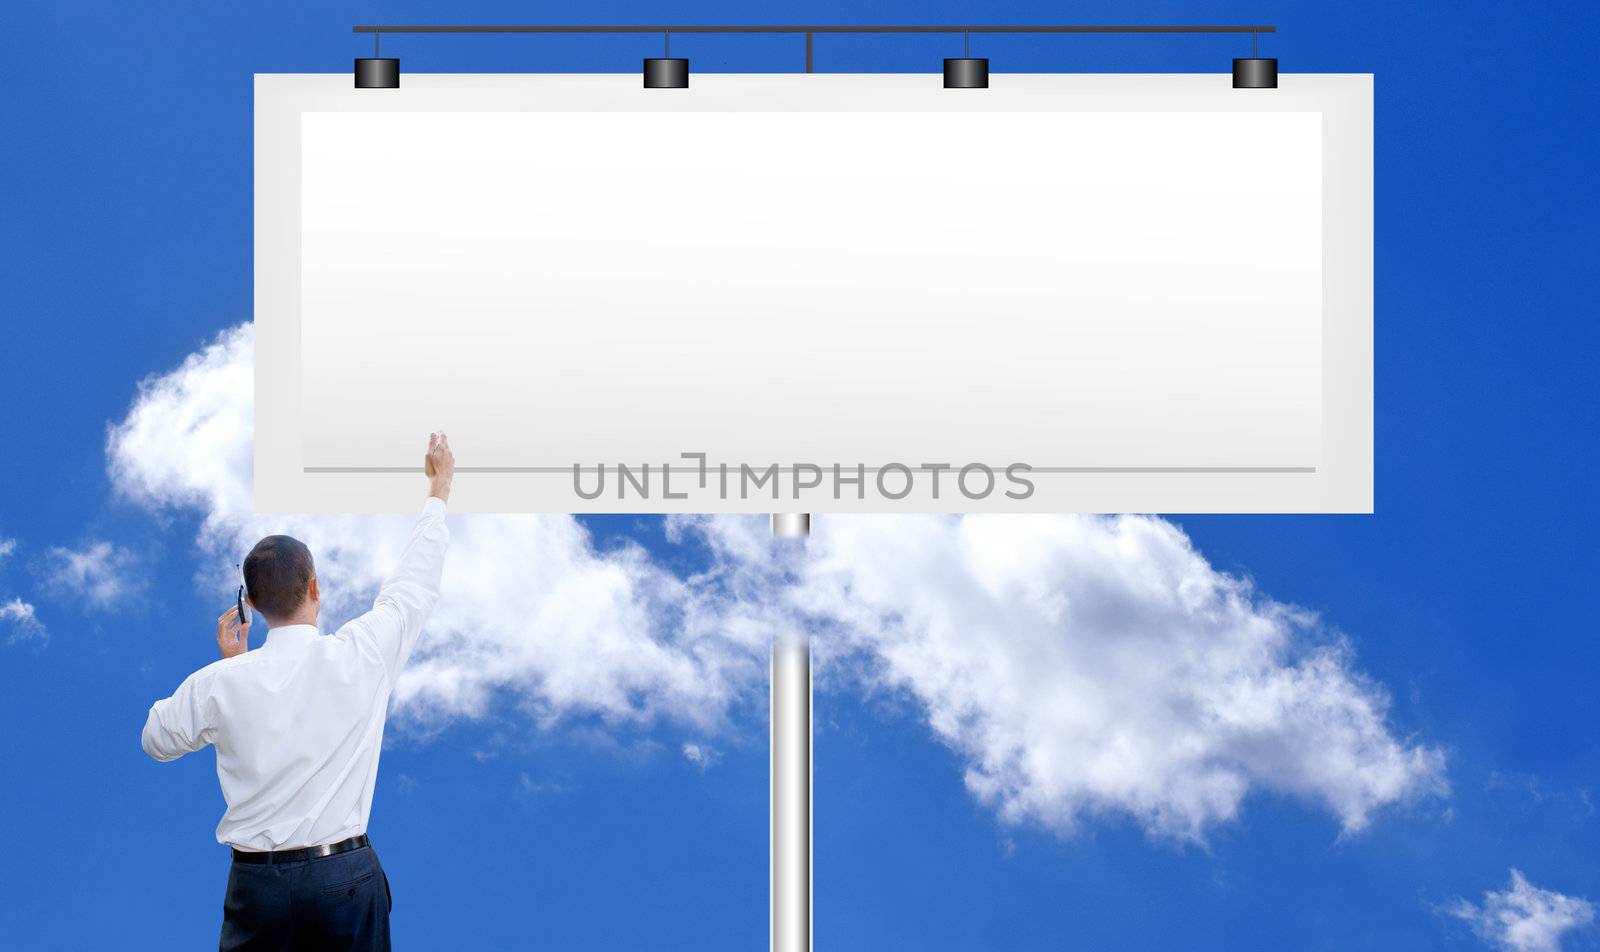 The successful businessman against a publicity board and the bright blue cloudy sky by sergey150770SV